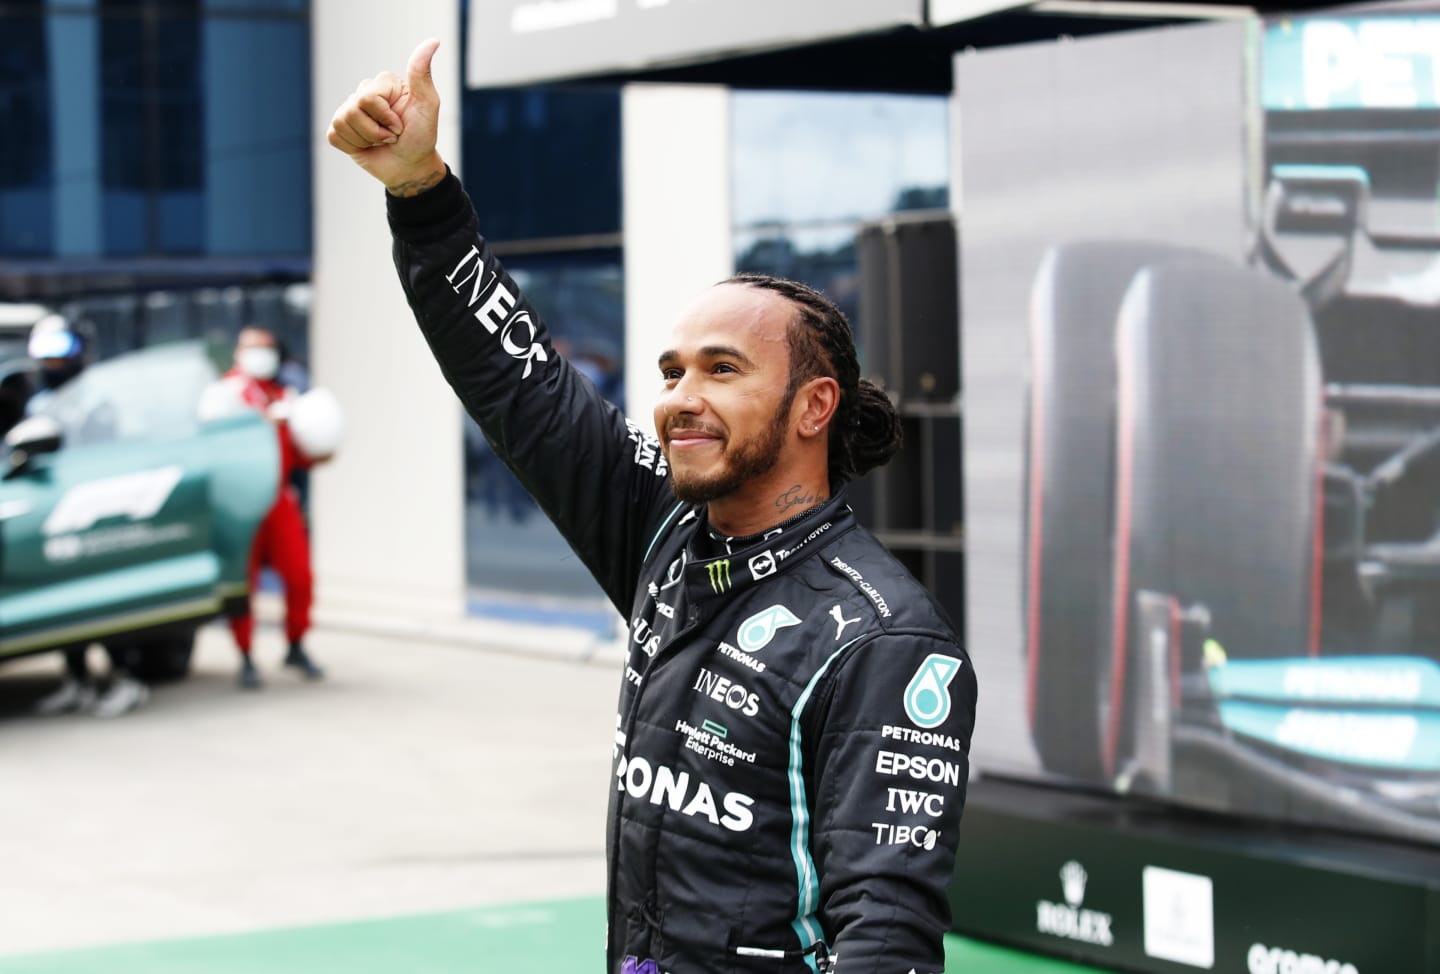 ISTANBUL, TURKEY - OCTOBER 09: Pole position qualifier Lewis Hamilton of Great Britain and Mercedes GP celebrates in parc ferme during qualifying ahead of the F1 Grand Prix of Turkey at Intercity Istanbul Park on October 09, 2021 in Istanbul, Turkey. (Photo by Umit Bektas - Pool/Getty Images)